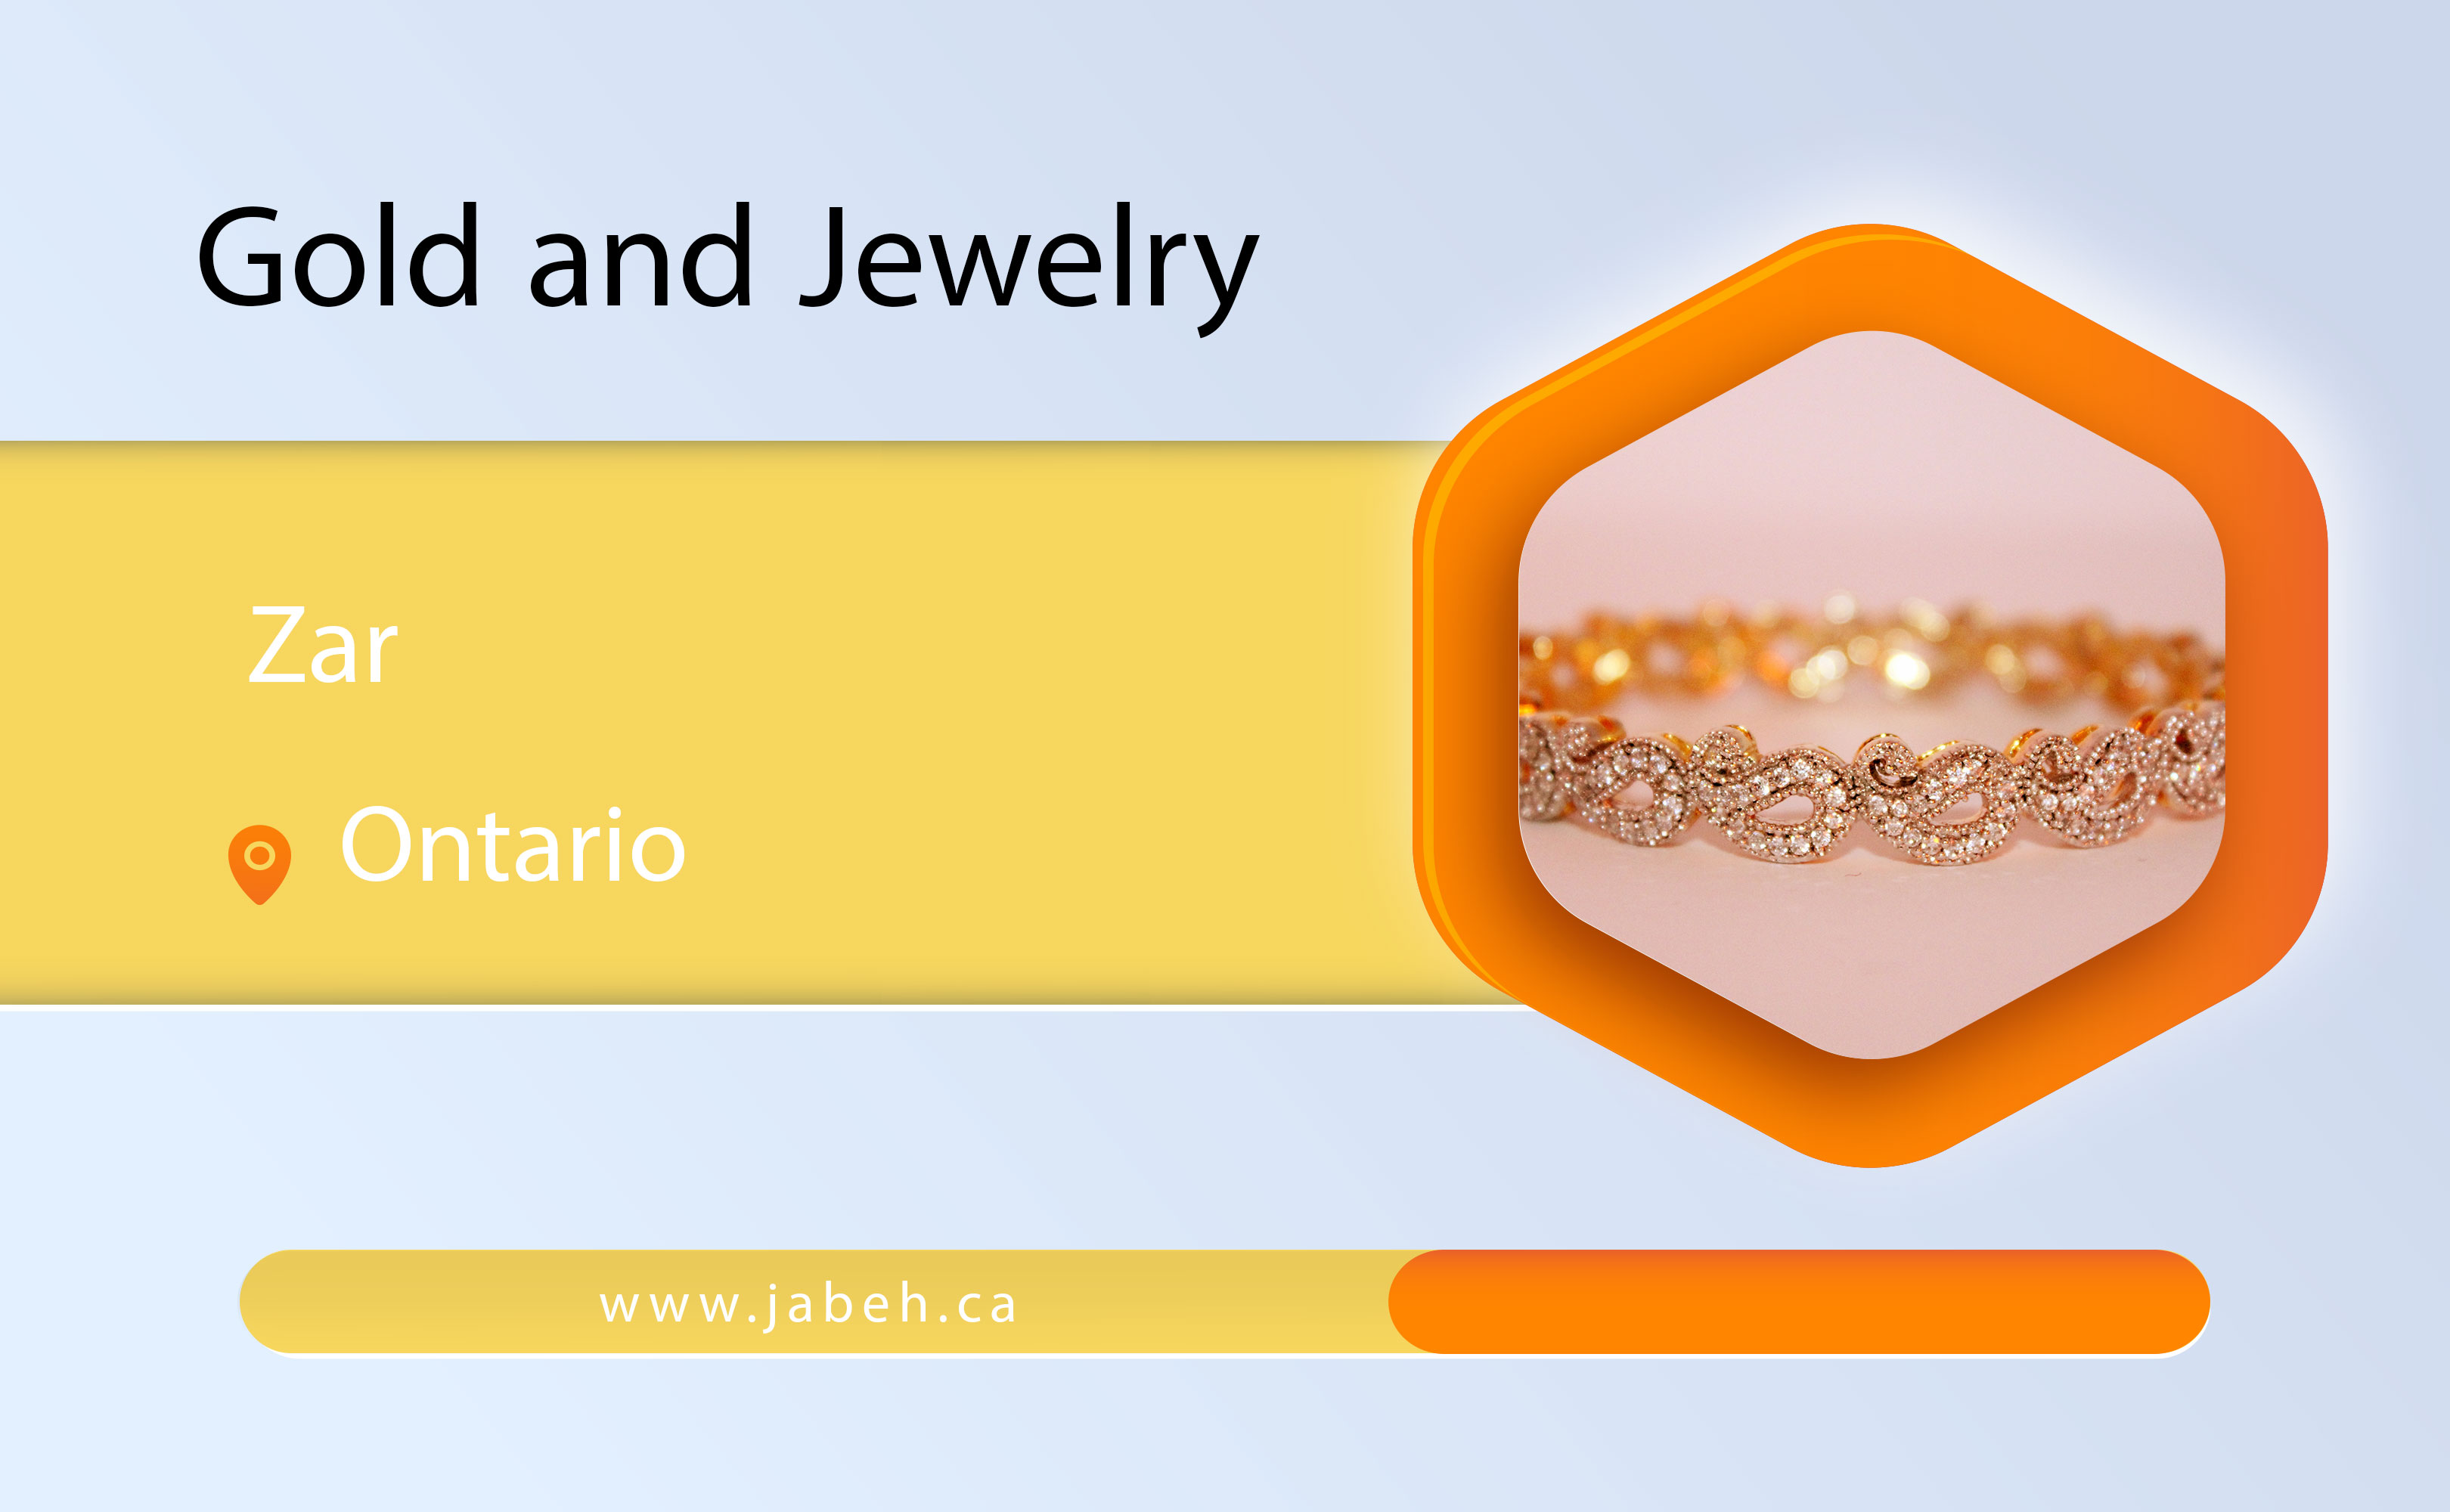 Iranian gold and jewelry gold in Ontario